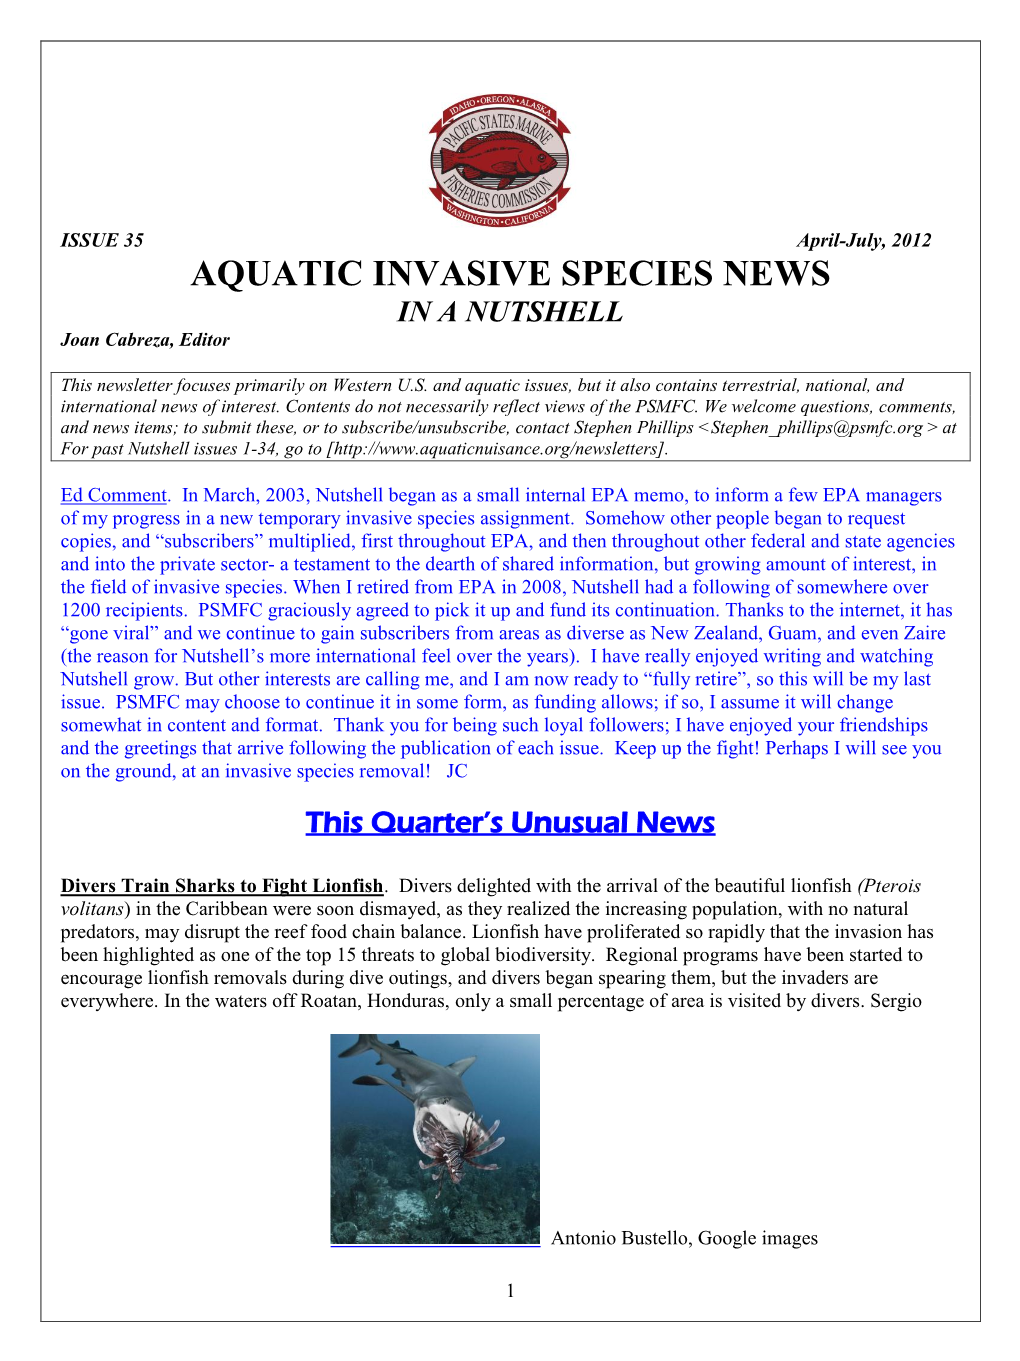 Aquatic Nuisance Species News in a Nutshell #35 (April – July 2012)